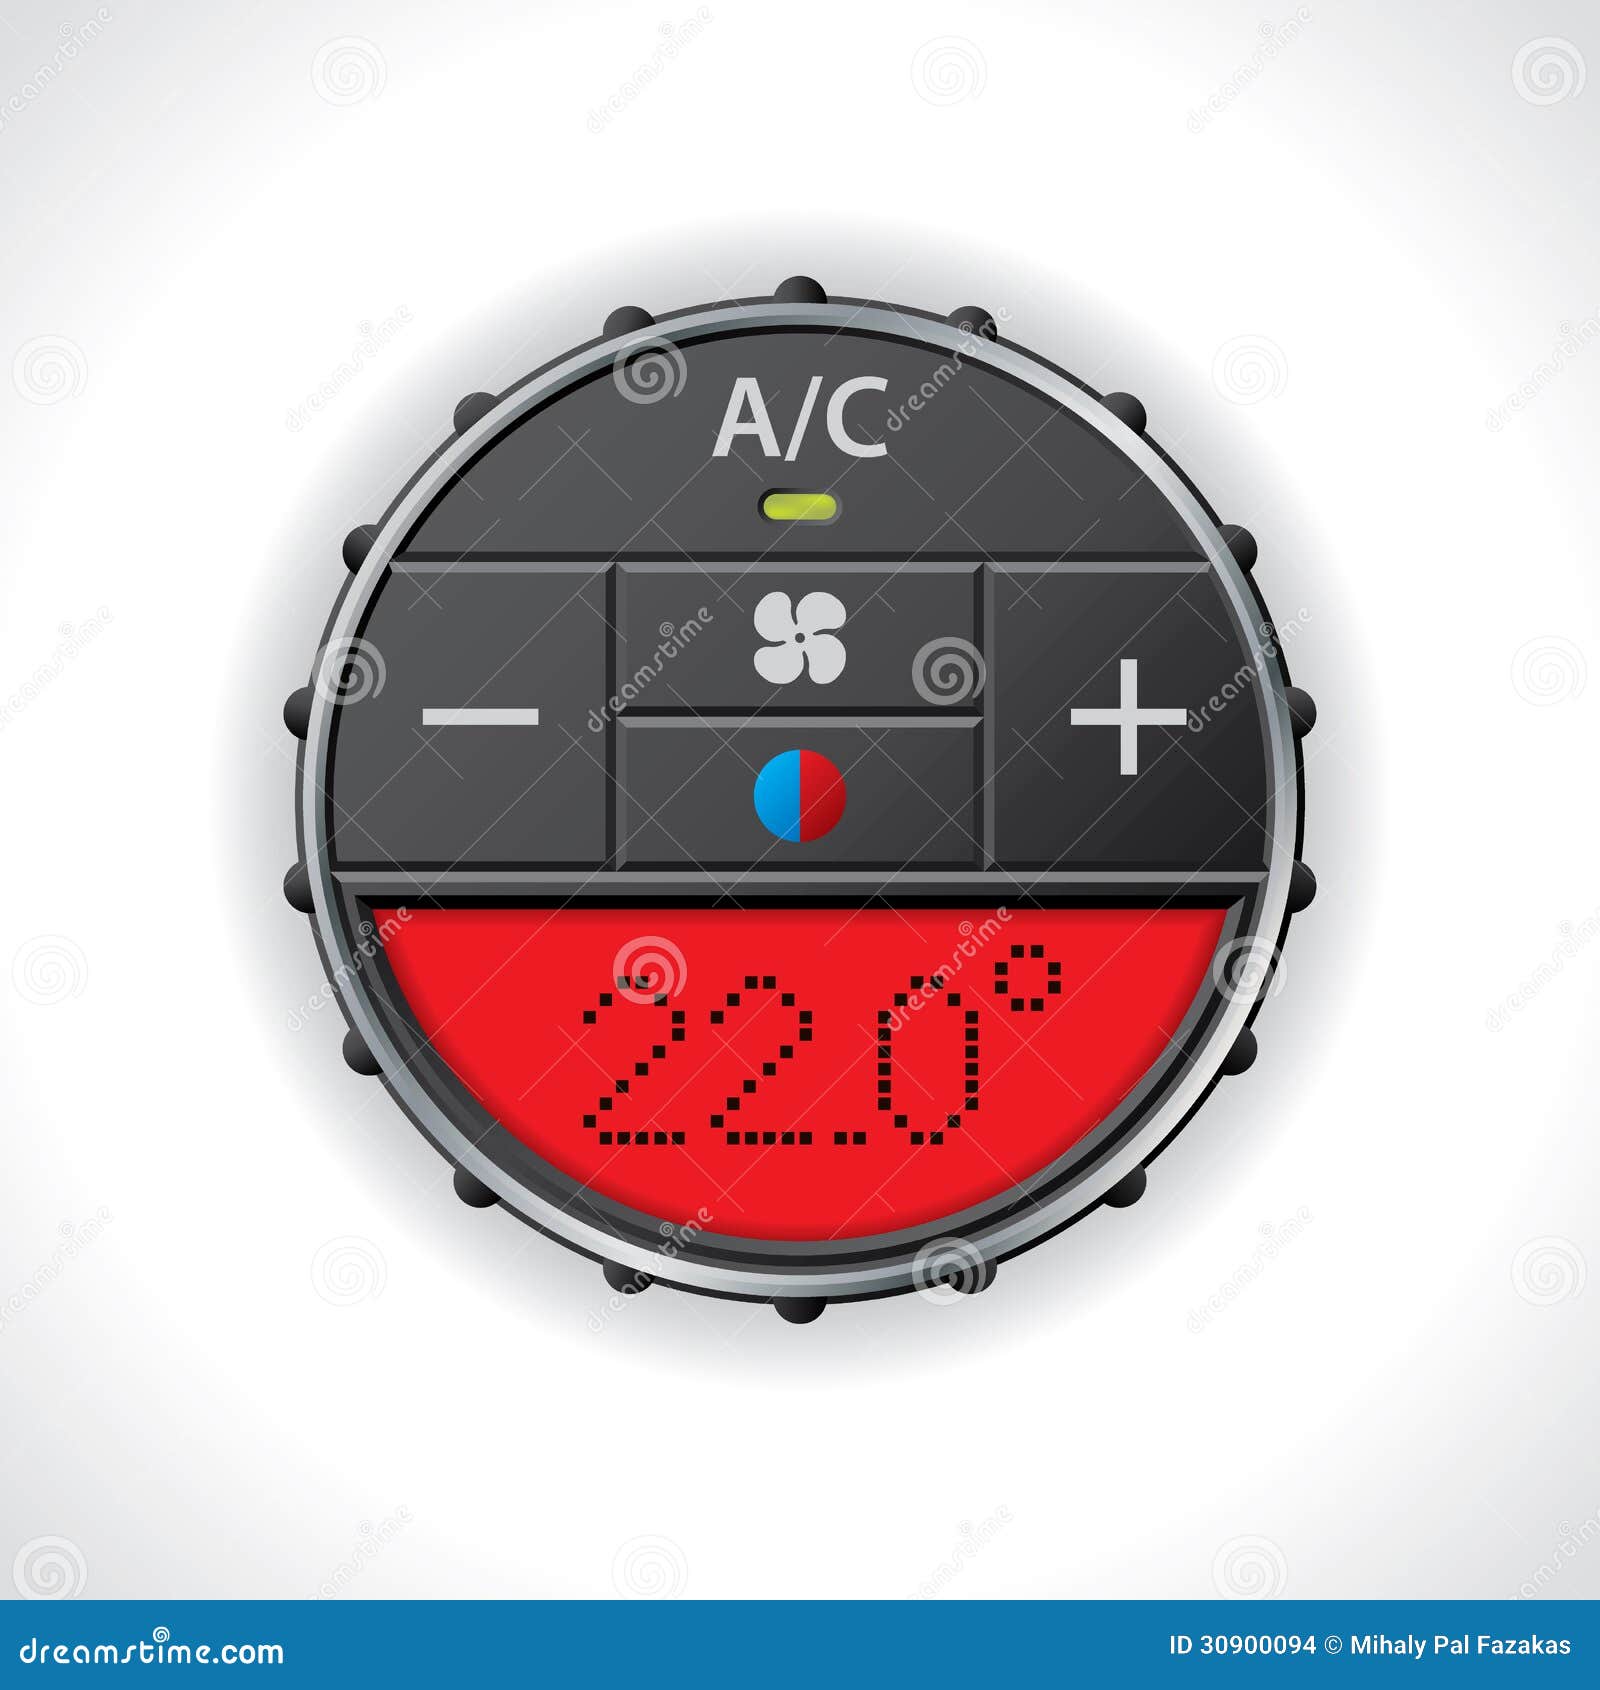 air conditioning gauge with red display